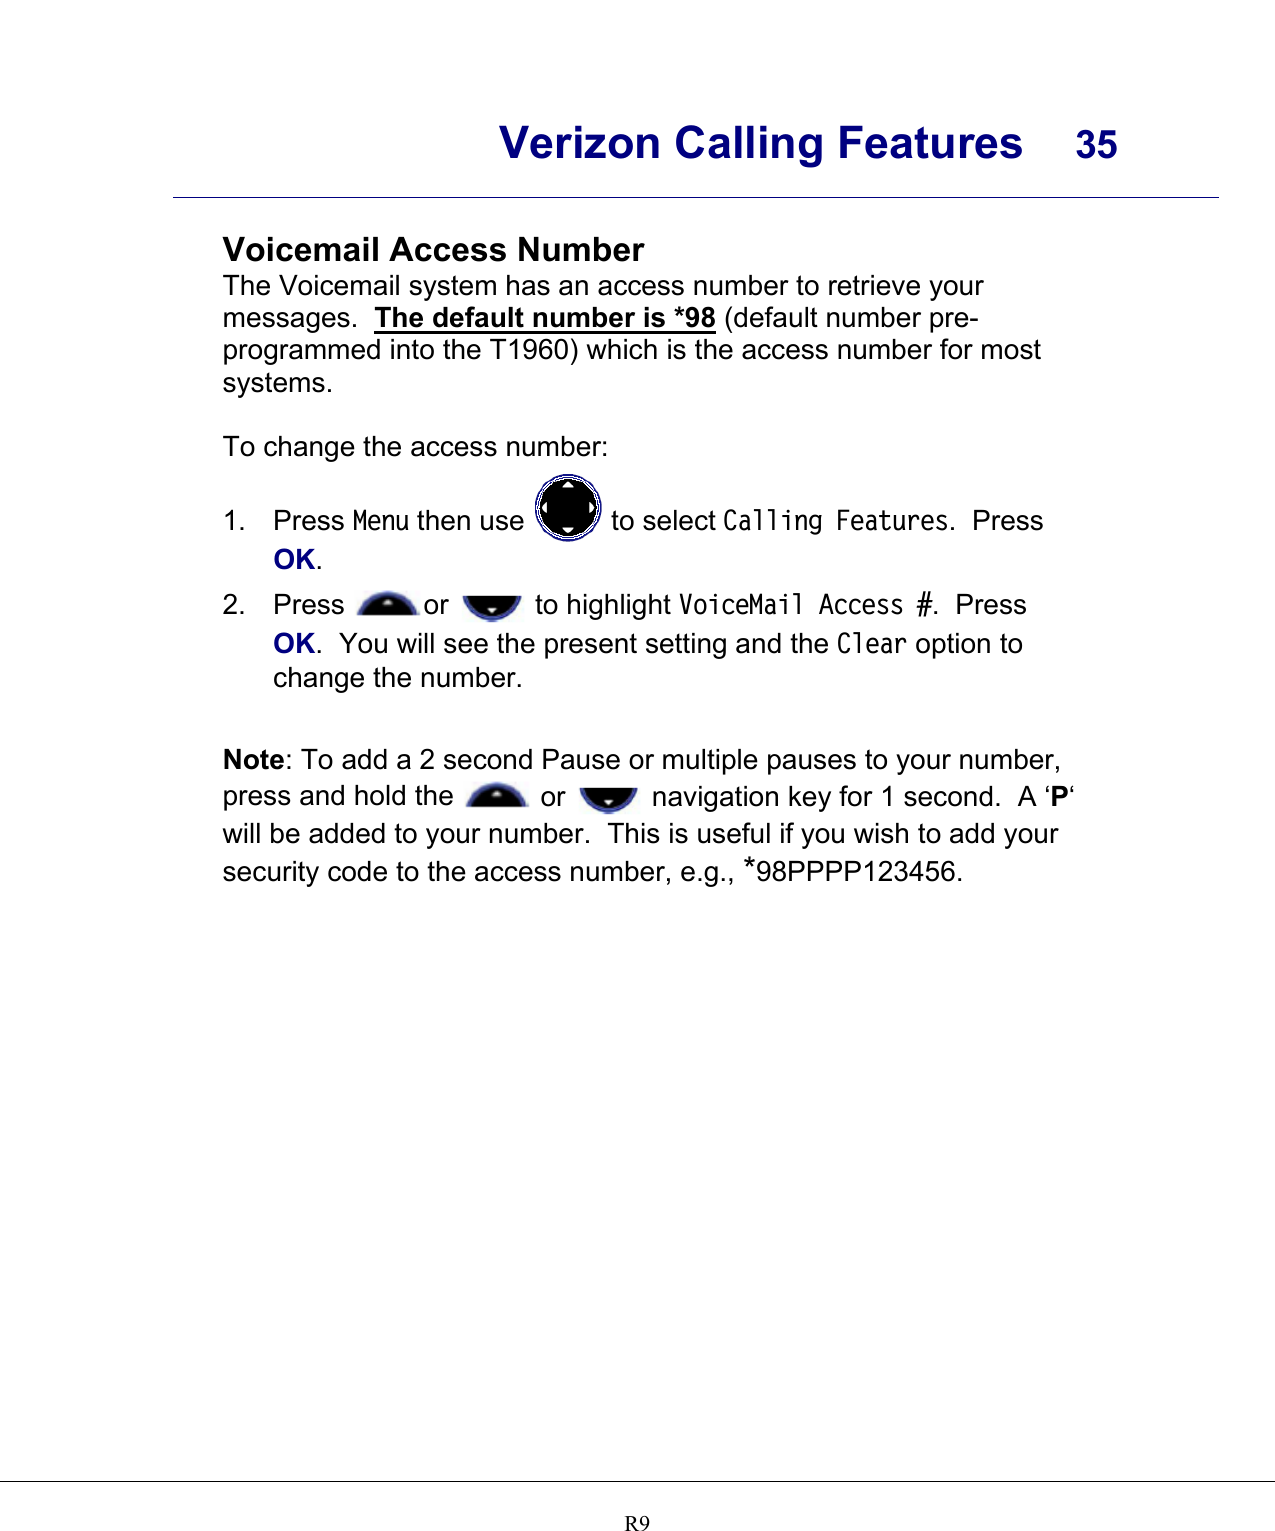      Verizon Calling Features  35    R9 Voicemail Access Number The Voicemail system has an access number to retrieve your messages.  The default number is *98 (default number pre-programmed into the T1960) which is the access number for most systems.  To change the access number: 1. Press Menu then use   to select Calling Features.  Press OK. 2. Press  or   to highlight VoiceMail Access #.  Press OK.  You will see the present setting and the Clear option to change the number.  Note: To add a 2 second Pause or multiple pauses to your number, press and hold the   or   navigation key for 1 second.  A ‘P‘ will be added to your number.  This is useful if you wish to add your security code to the access number, e.g., *98PPPP123456.      